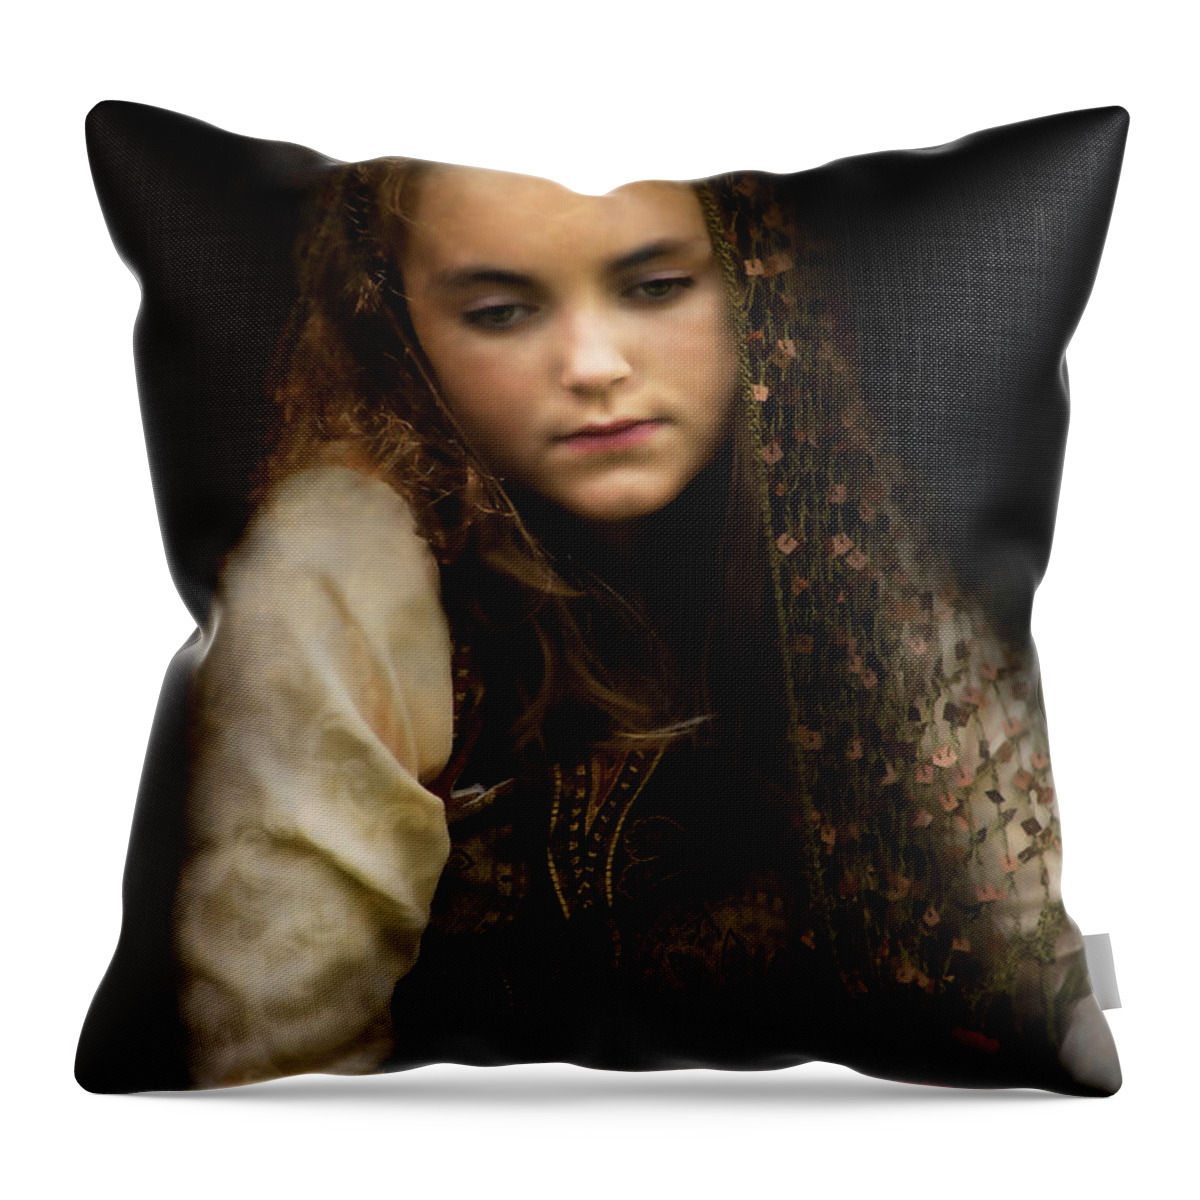 Niece Throw Pillow featuring the photograph Olivia #2 by John Rivera